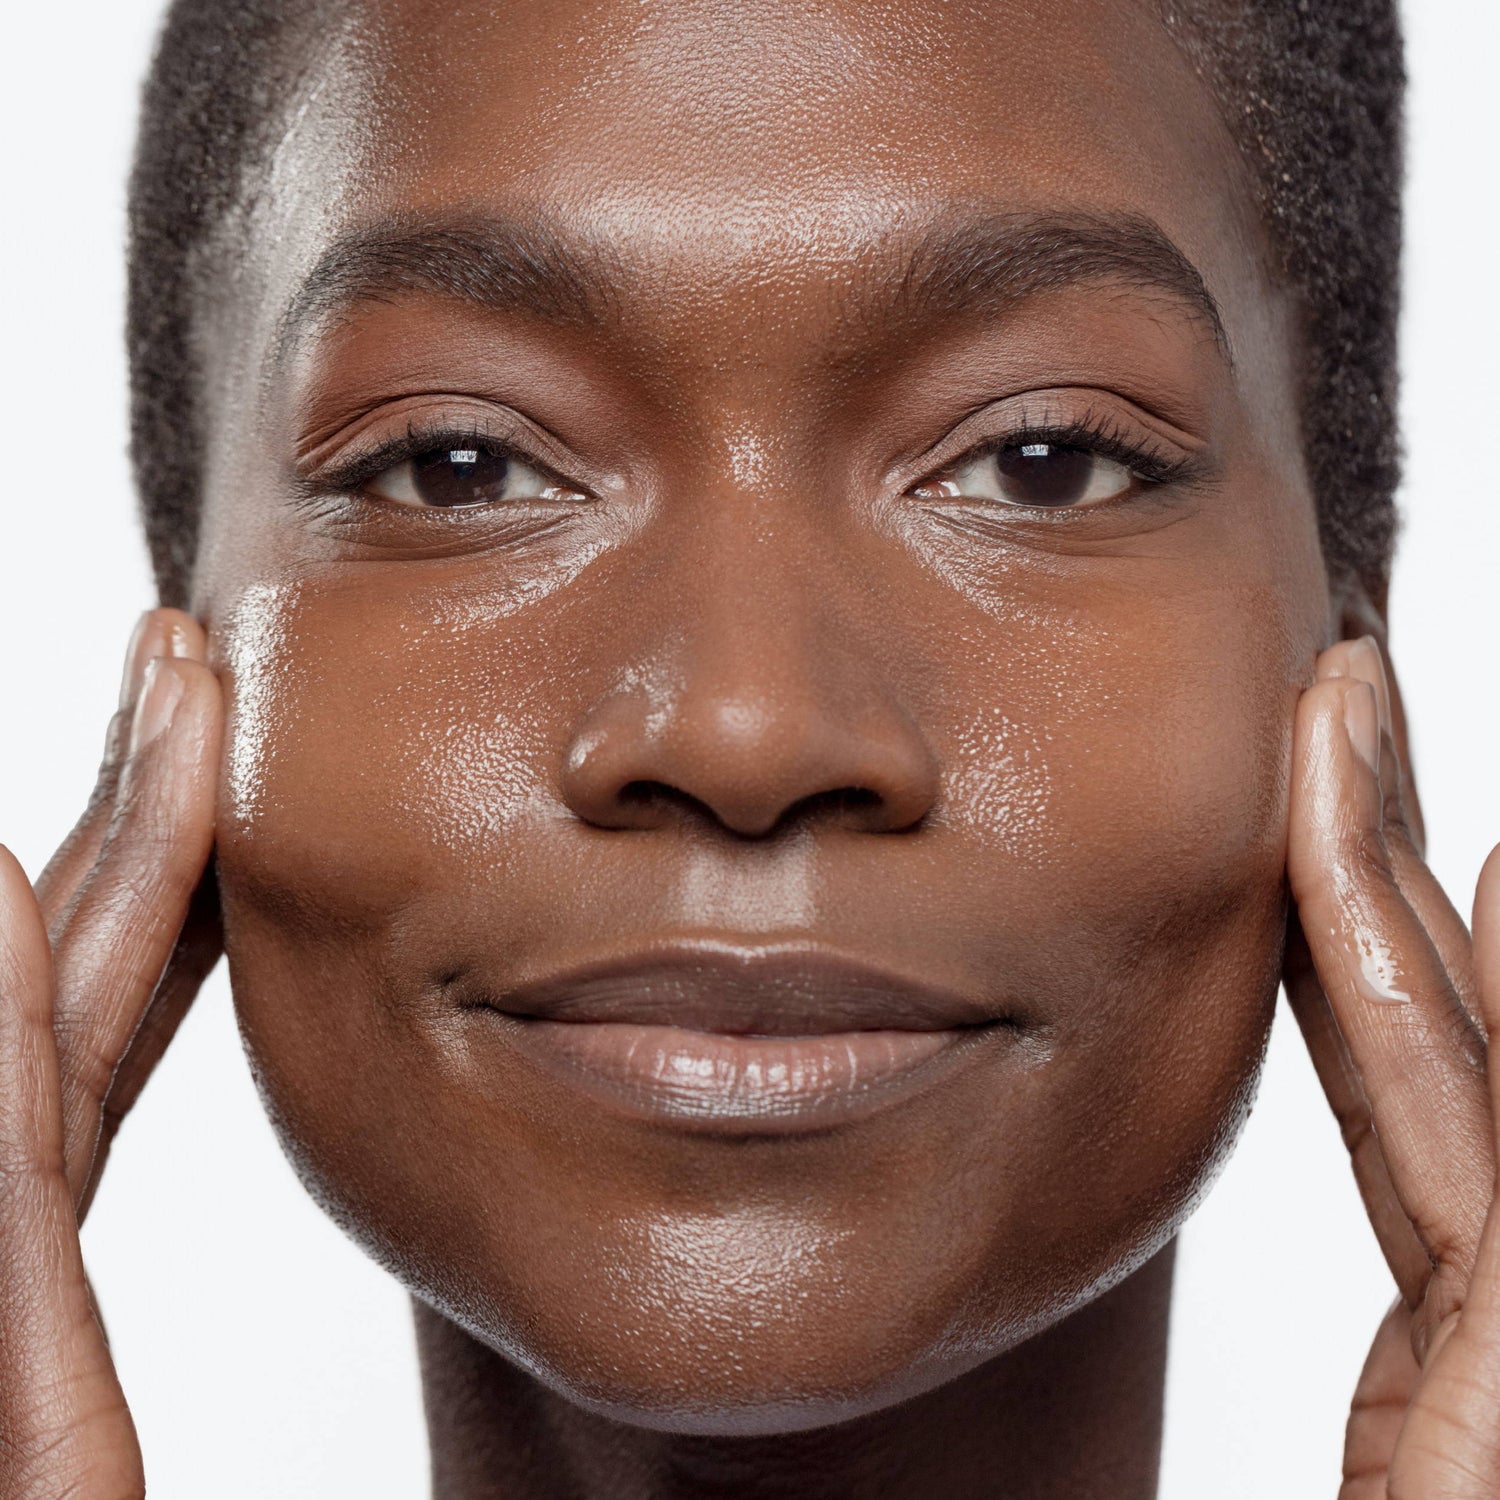 Top #3 Serums for Dehydration